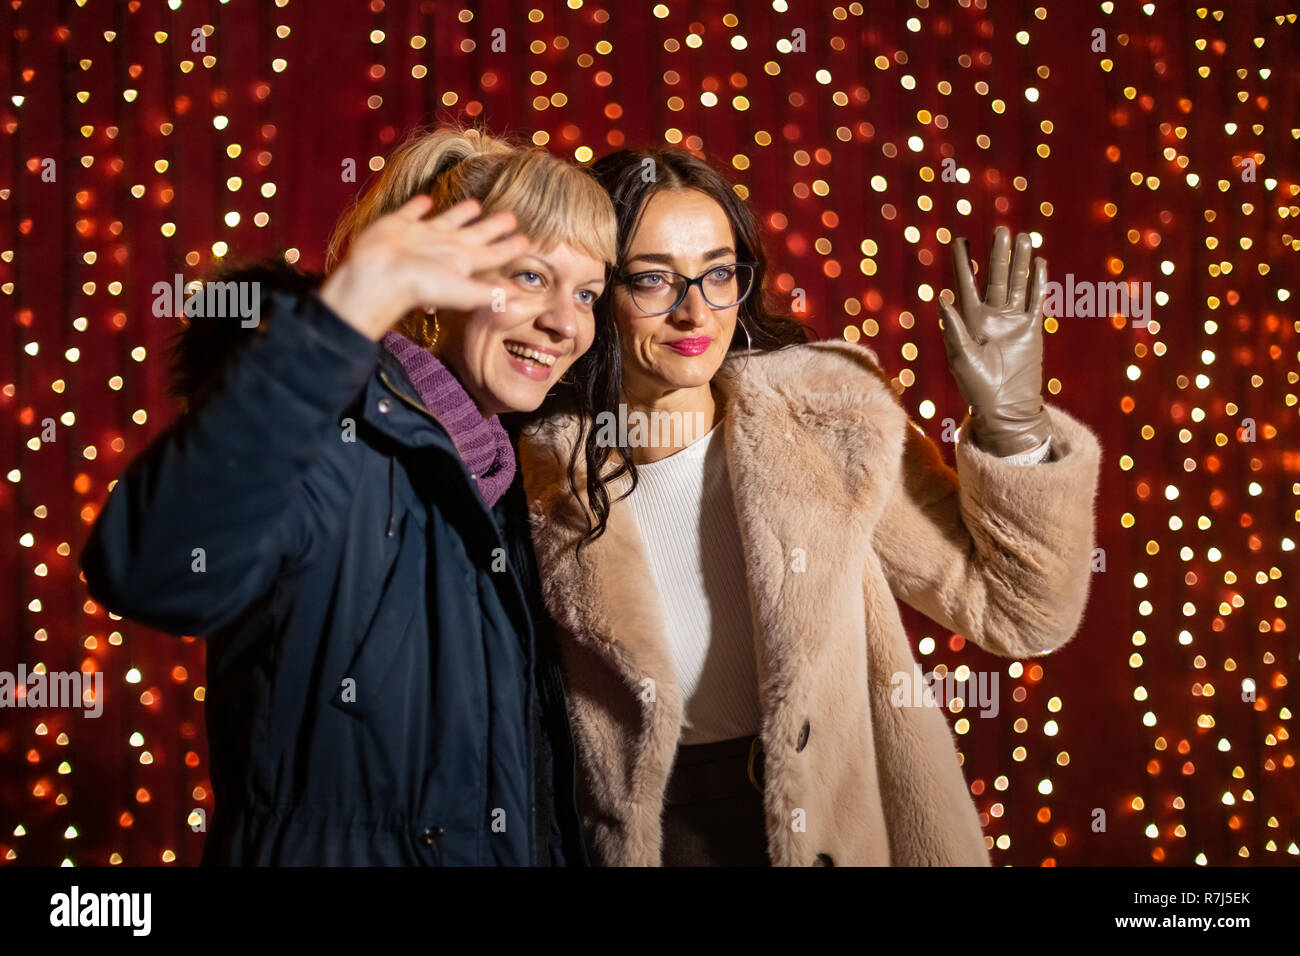 Two attractive women posing for photo in front of light wall at Christmas market. Stock Photo